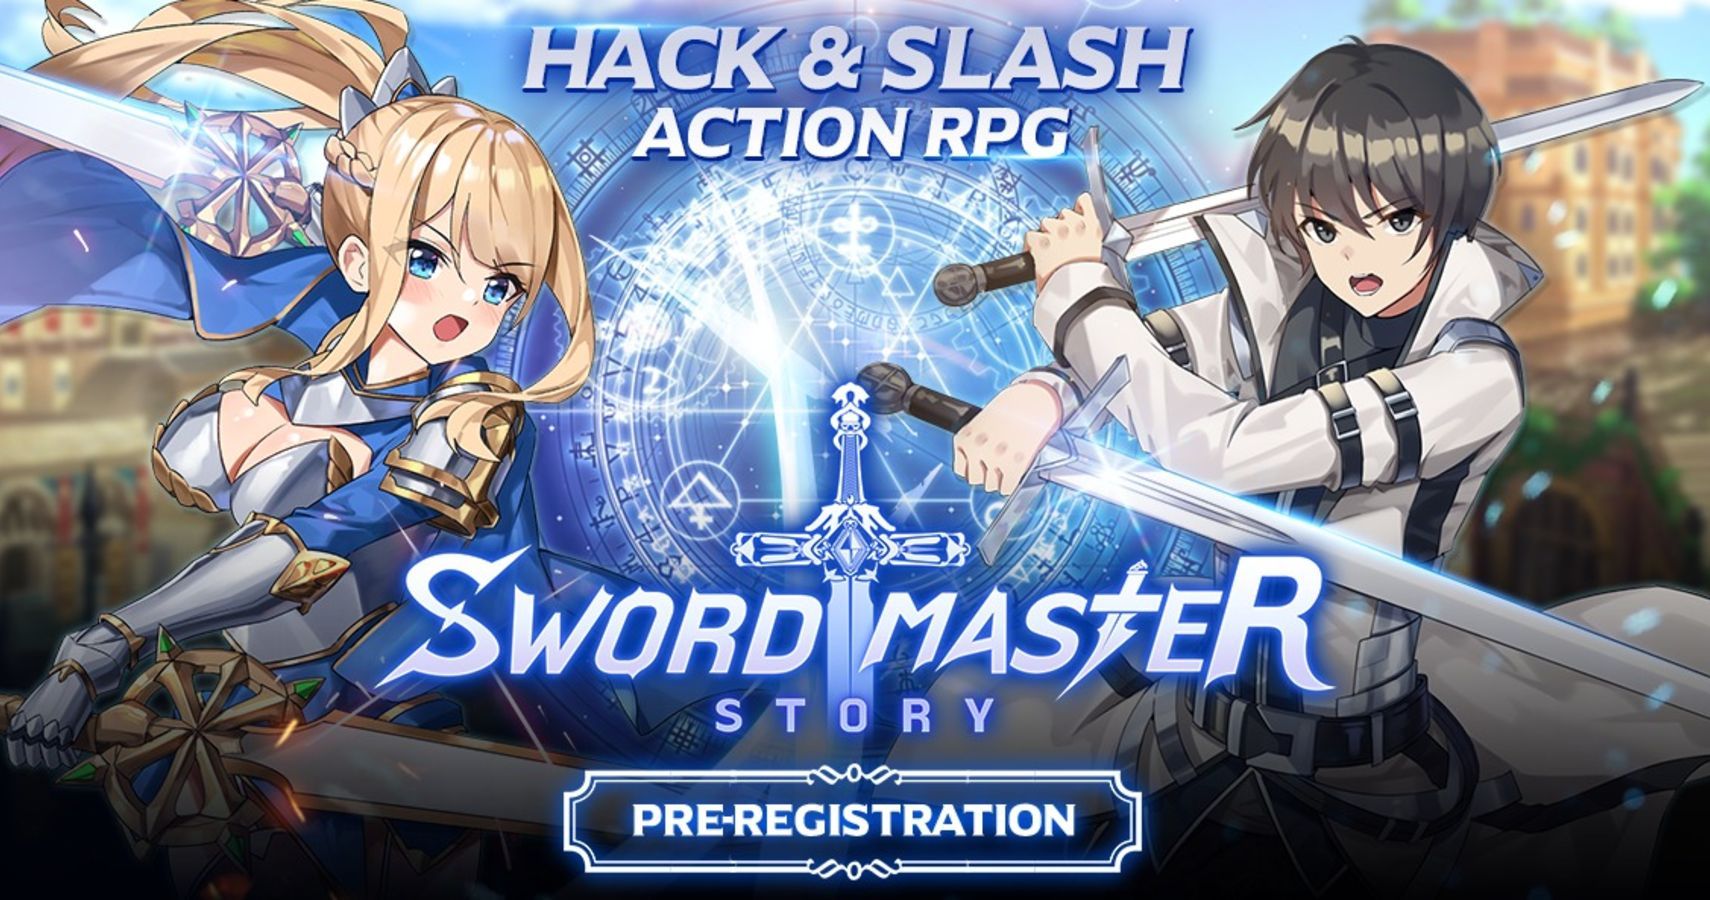 Hack And Slash RPG Sword Master Story Now Available for iOS & Android